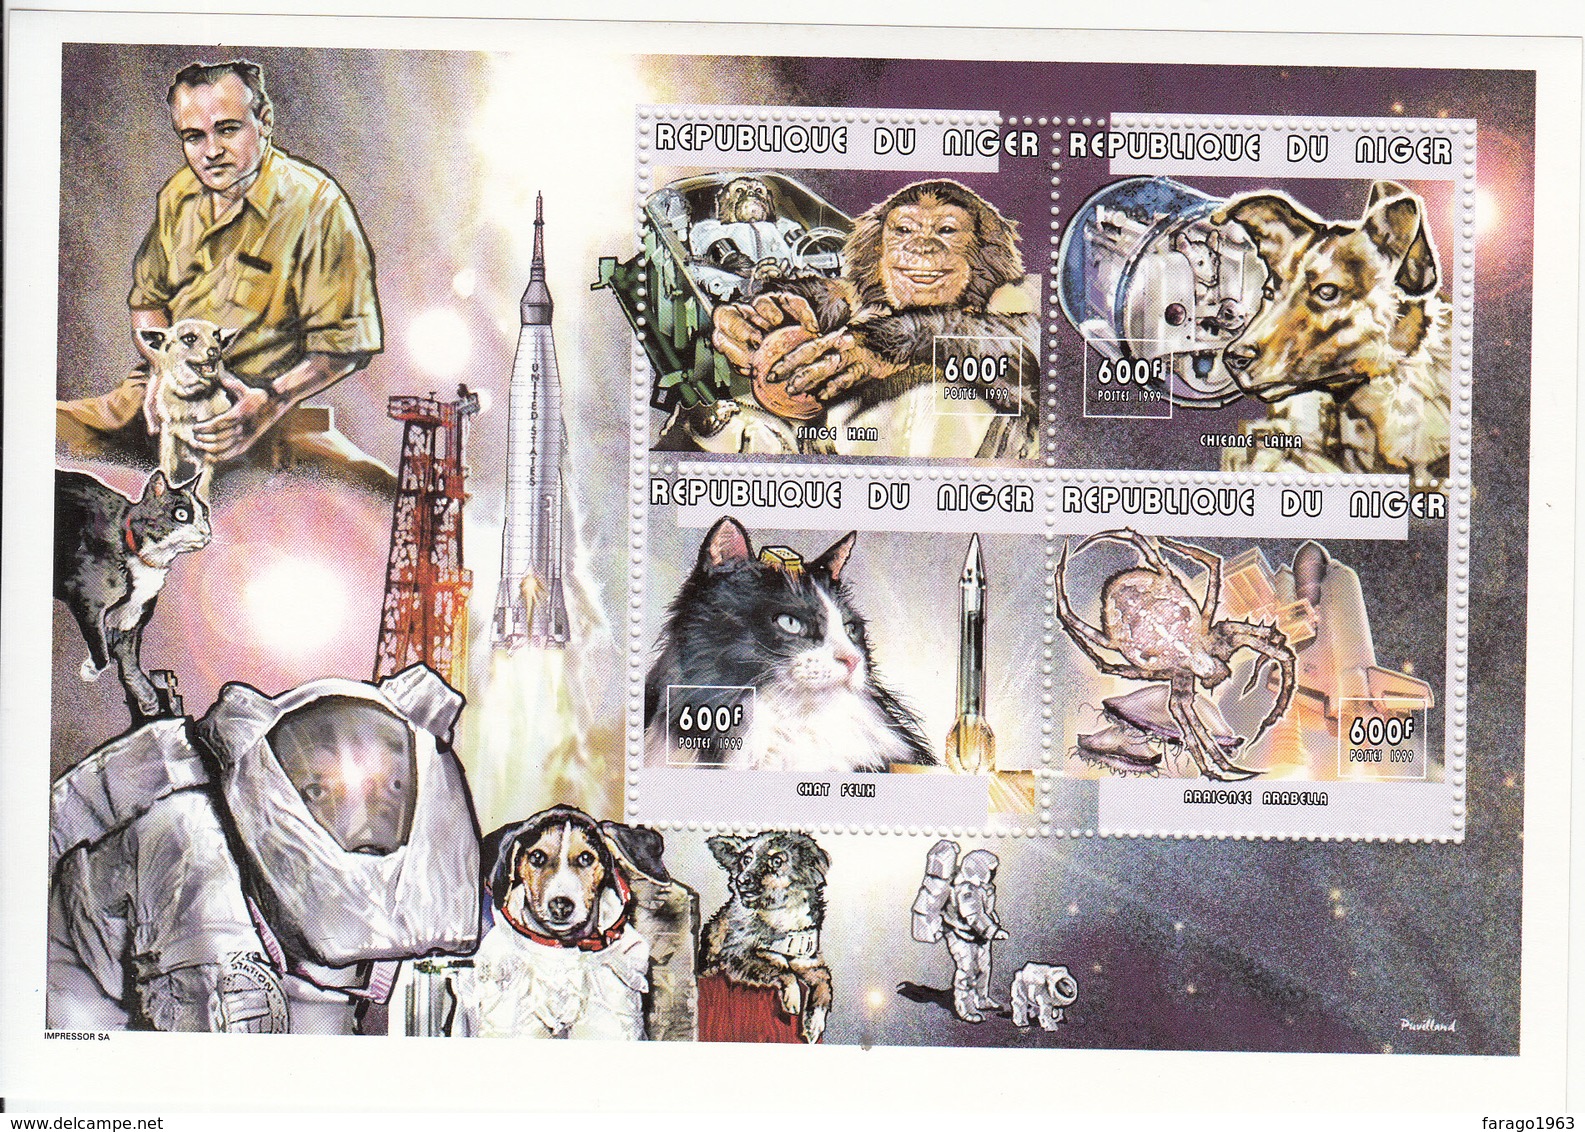 1999 Niger Space Dogs Cats  Miniature Sheet  MNH  CHEAPER THAN BUYING WHOLE SET - Niger (1960-...)